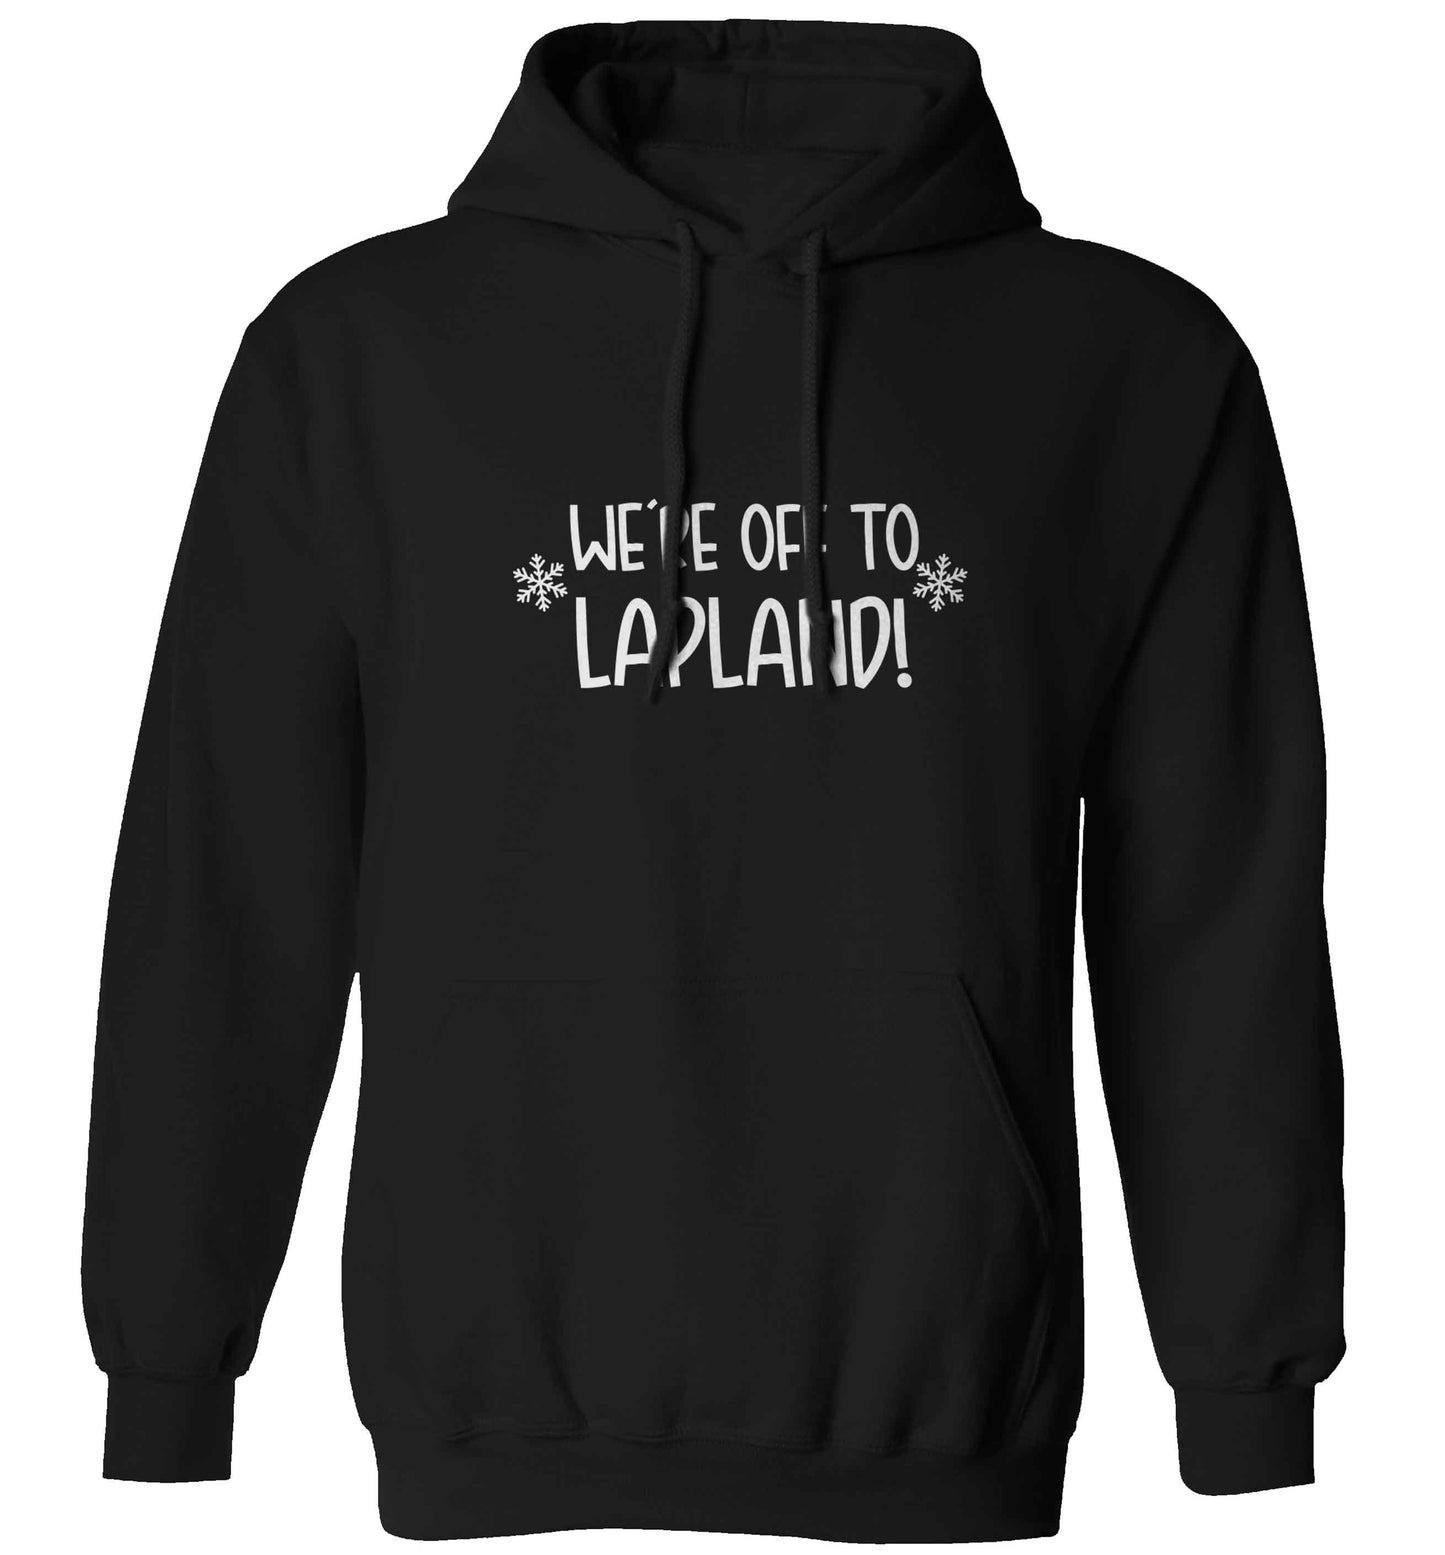 We're off to Lapland adults unisex black hoodie 2XL